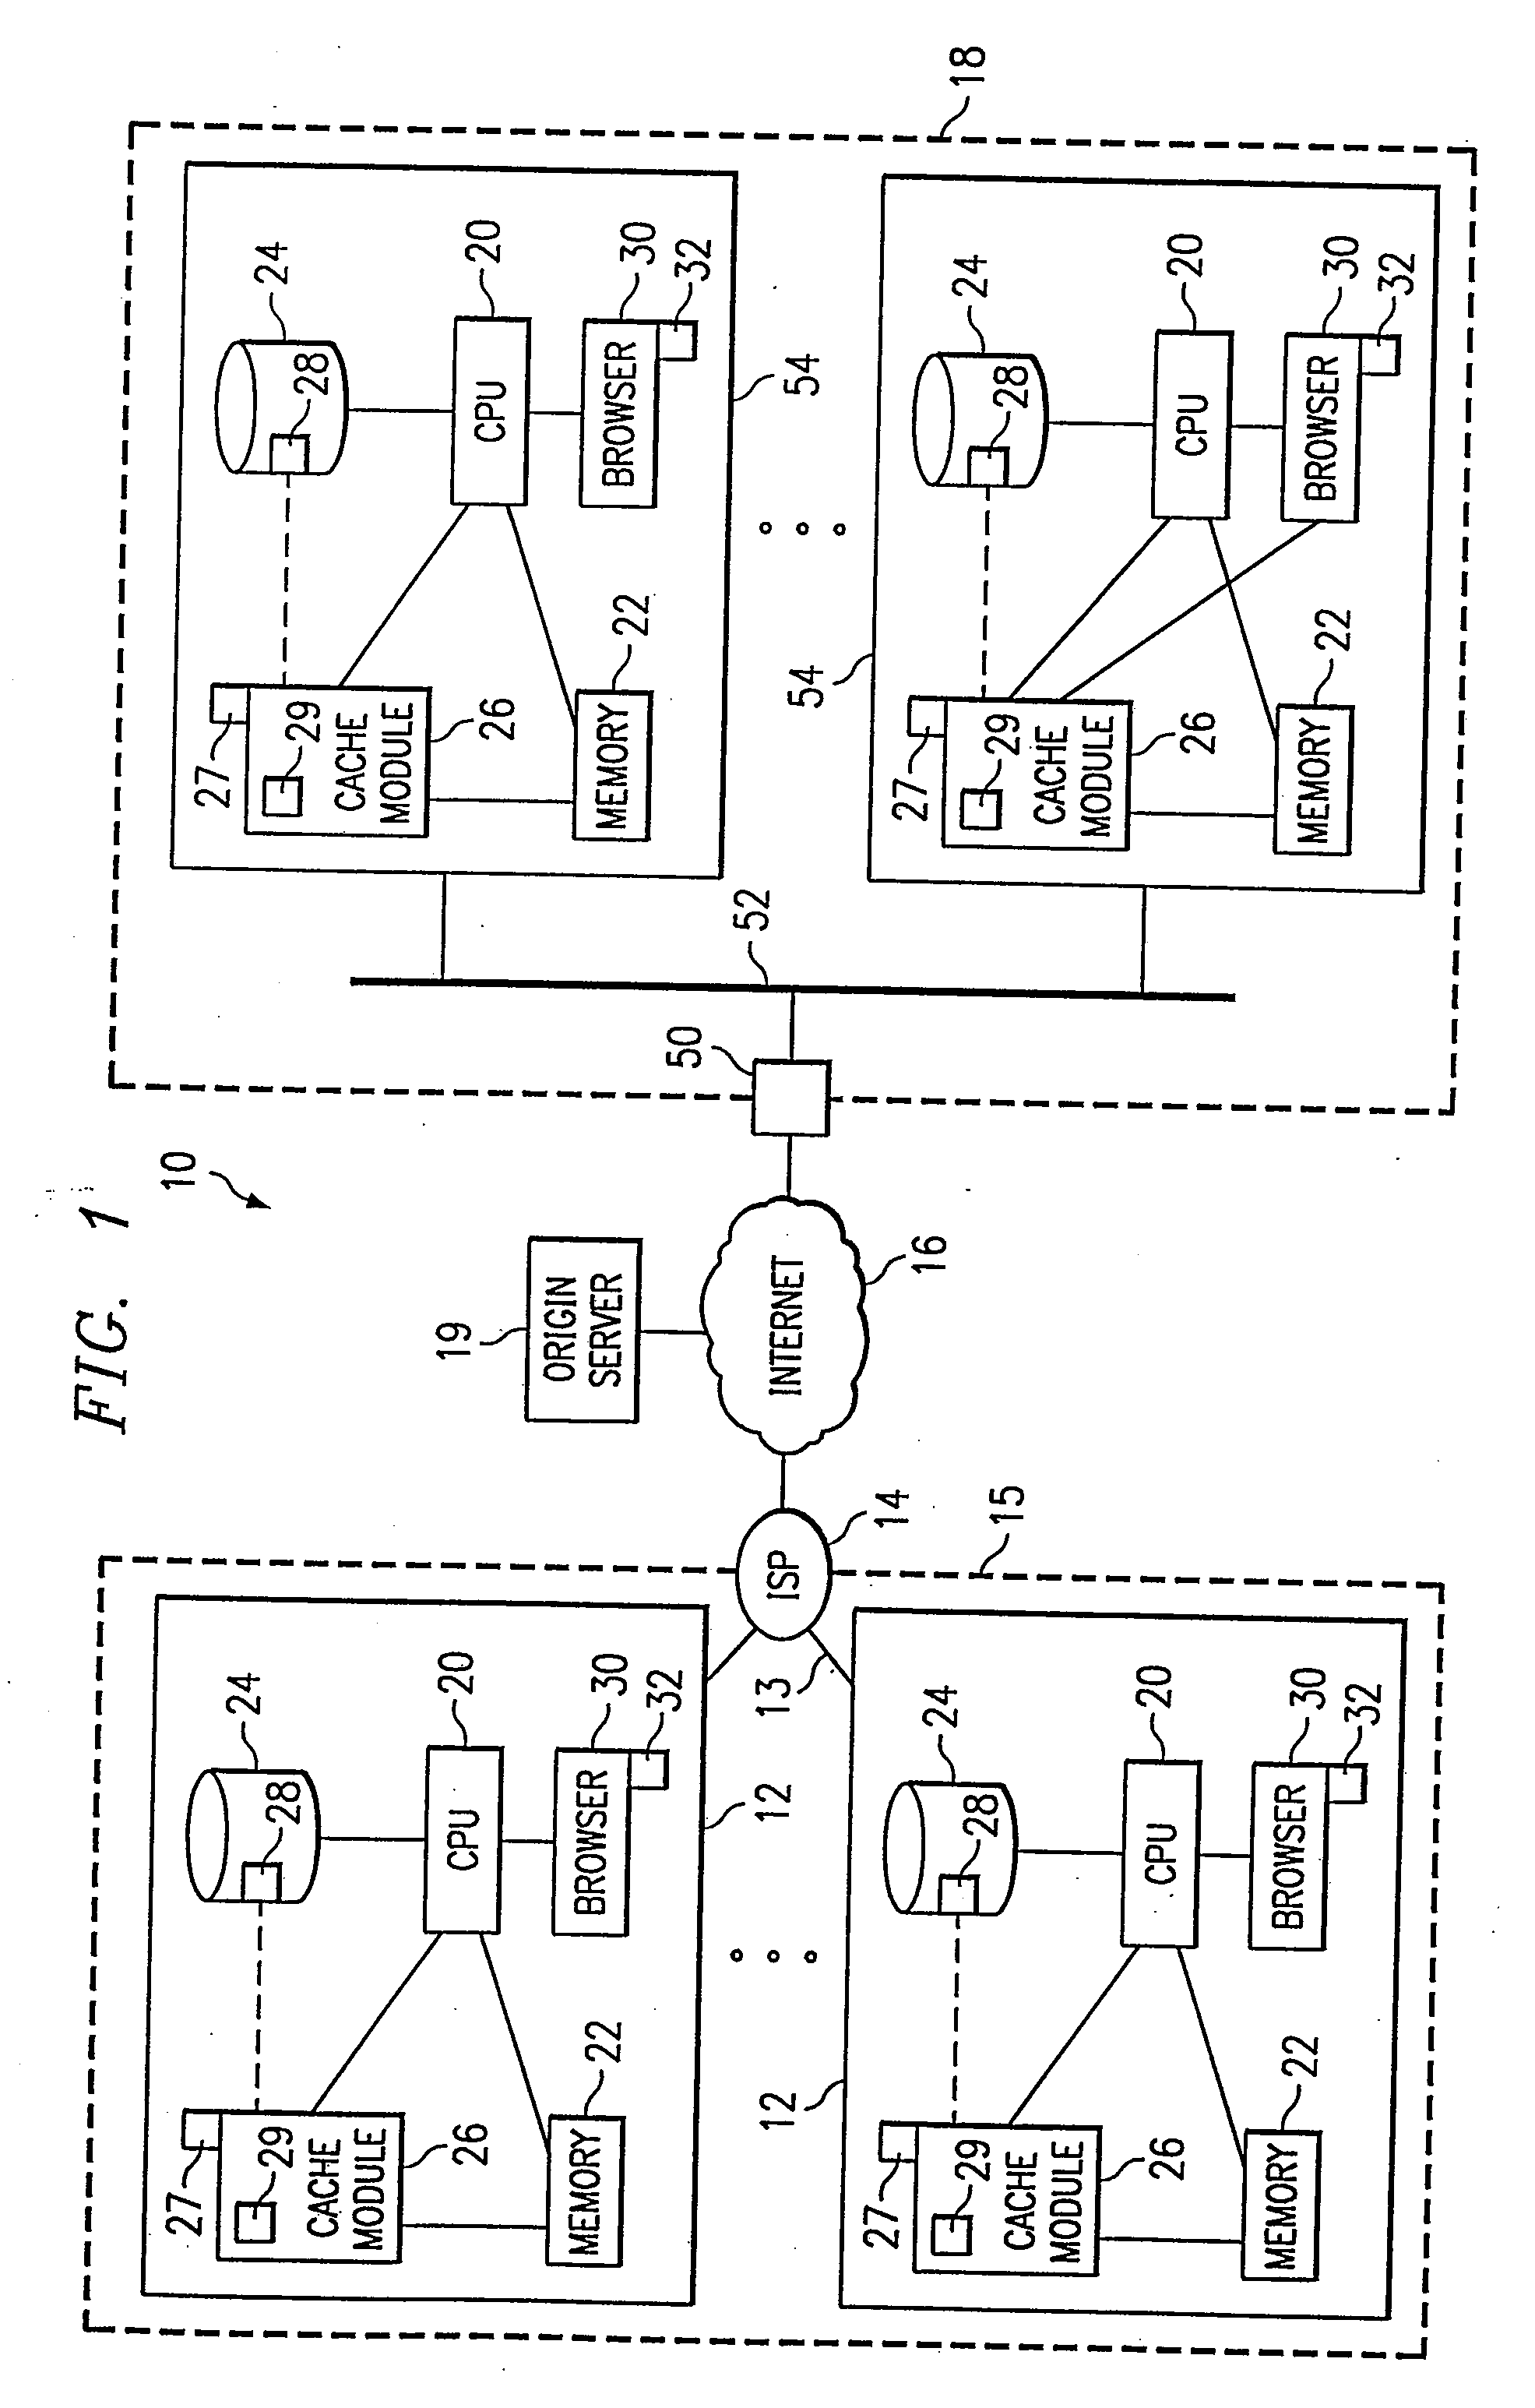 Method and System for Community Data Caching